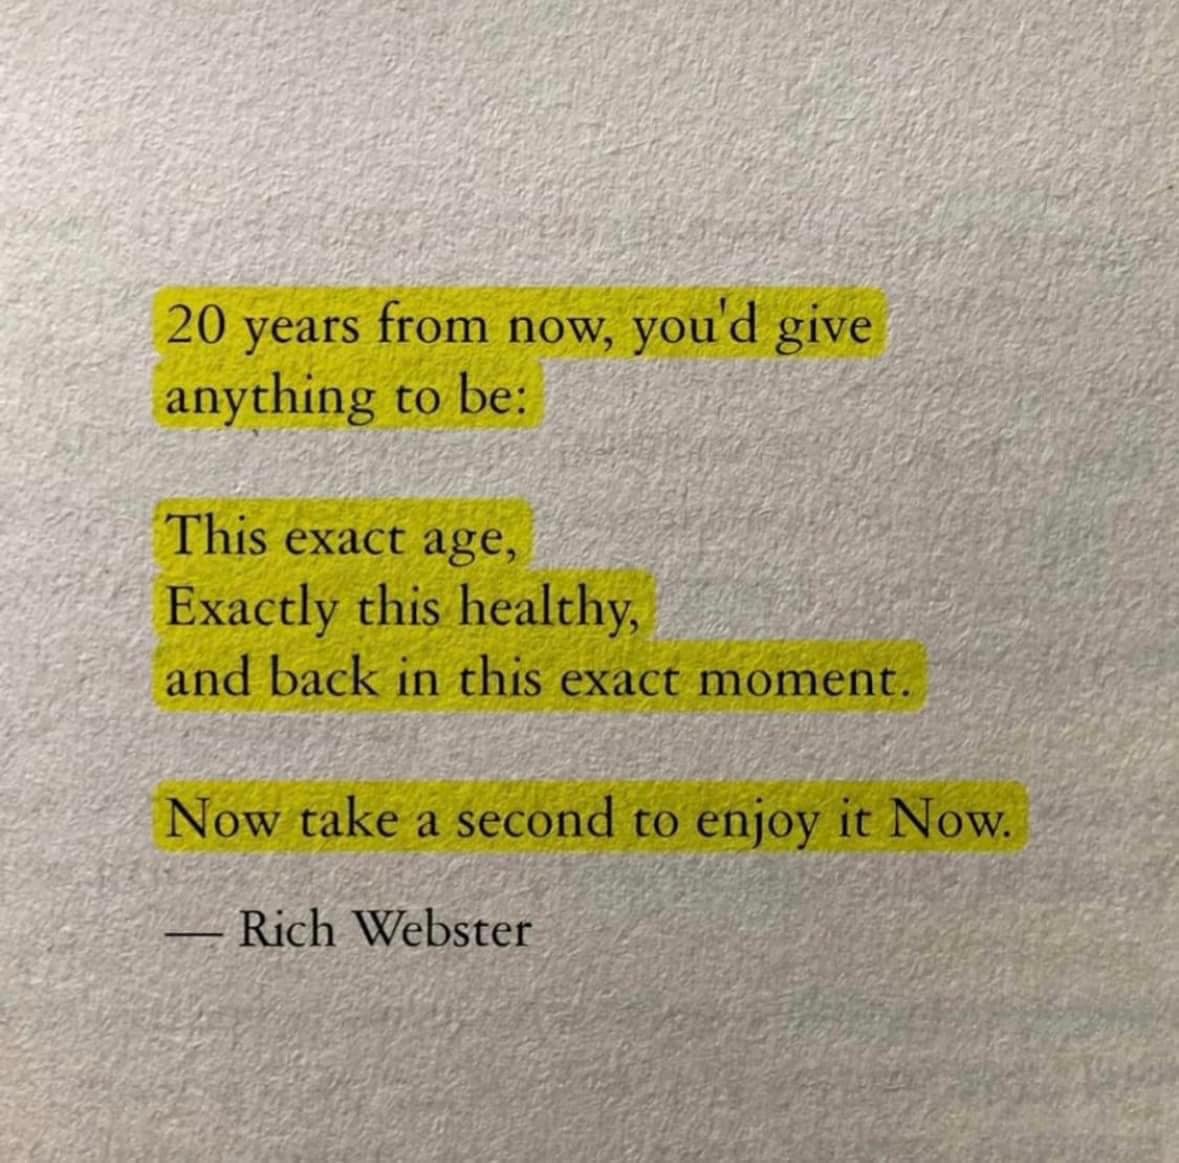 Enjoy where you are and who you are right now.